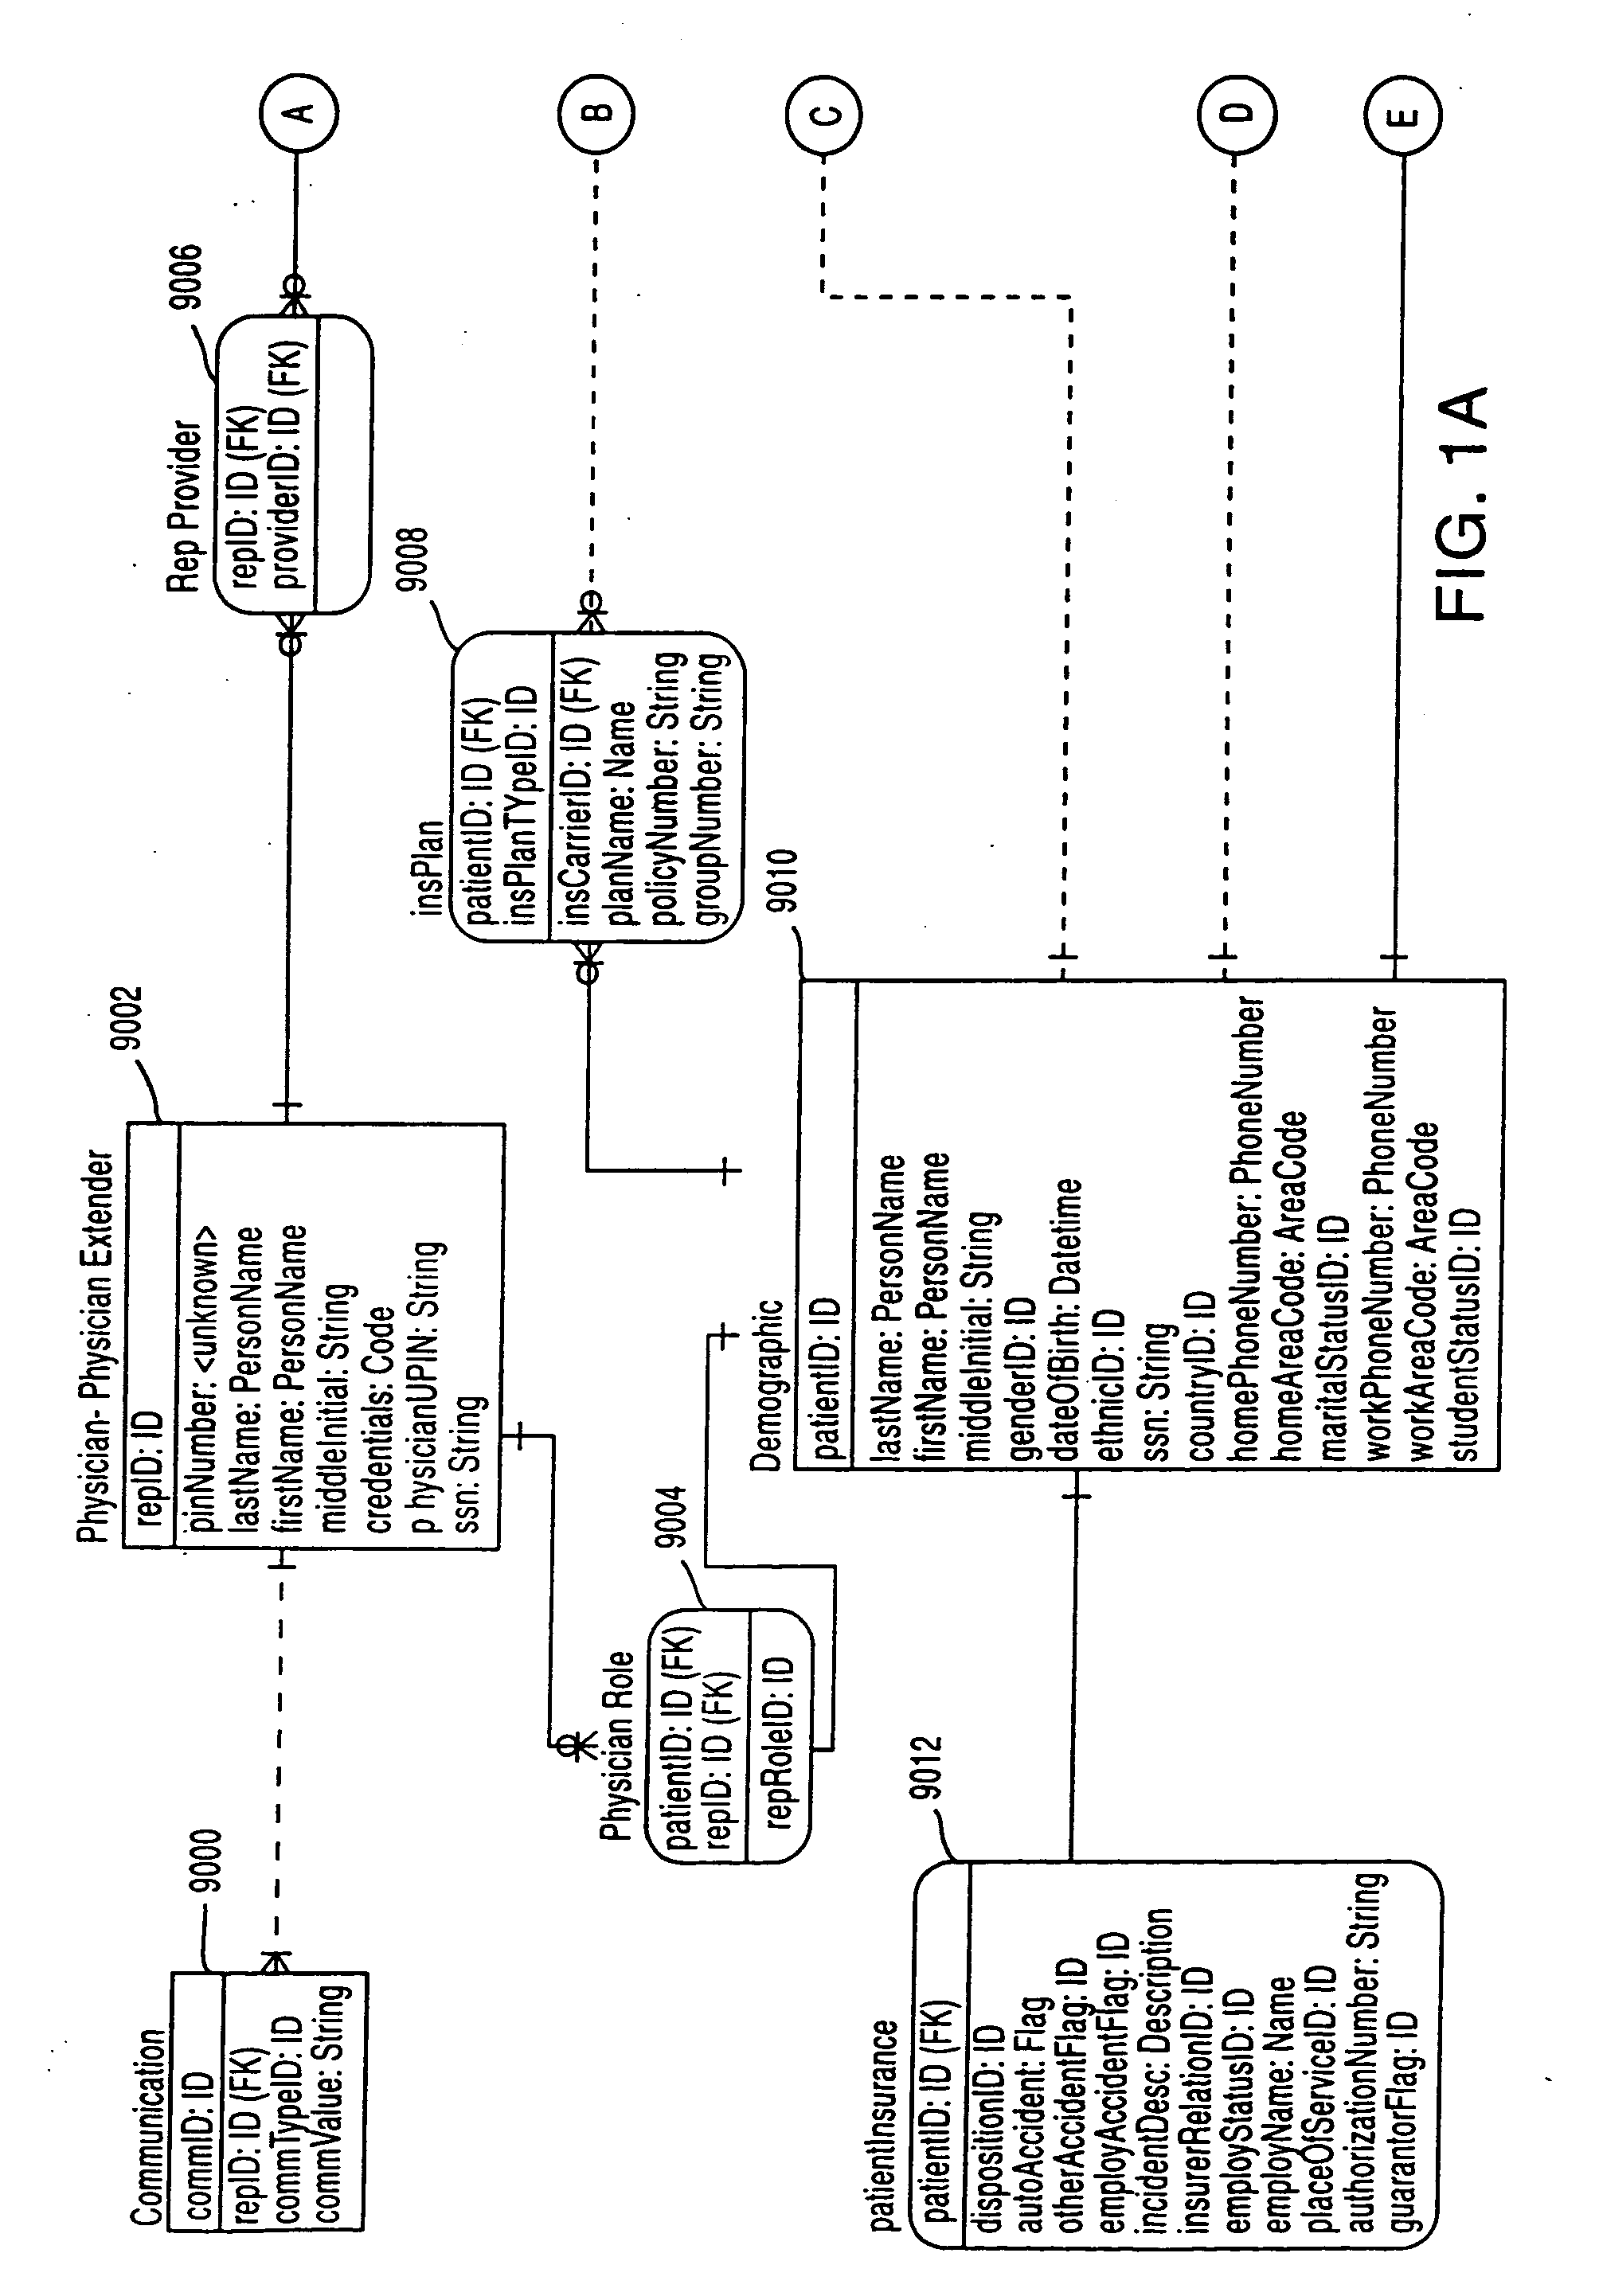 System and method for displaying a health status of hospitalized patients